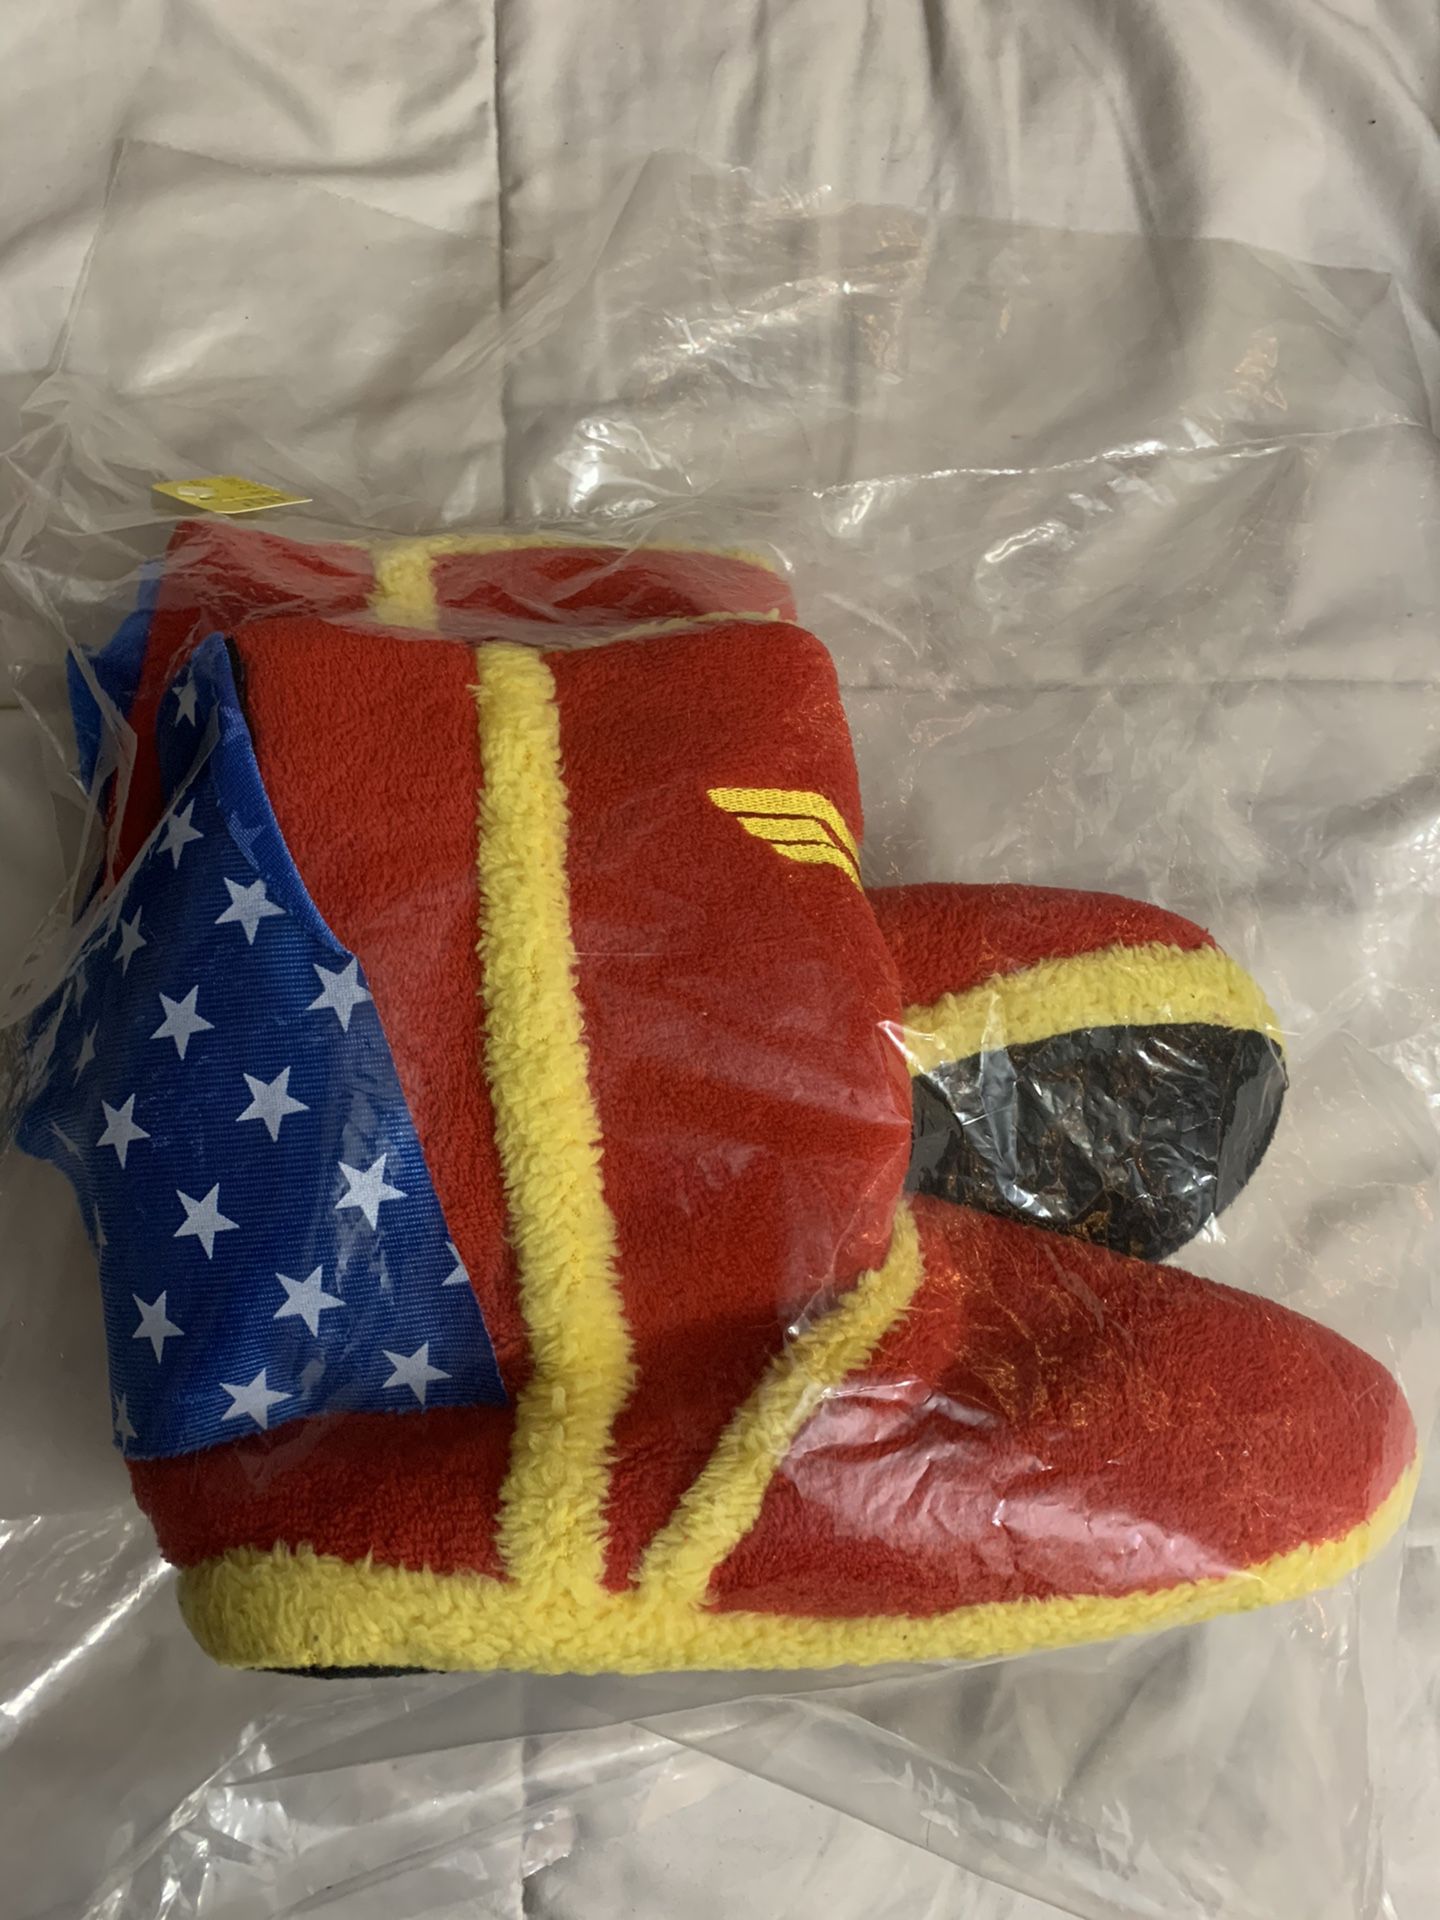 DC Comics Wonder Woman Caped Shoes Boot Slippers NEW Color: Red/Blue/Yellow. Original 1940 Theme. Comfy for everyday wear. Size: 8.5-9.5. 10 inches i